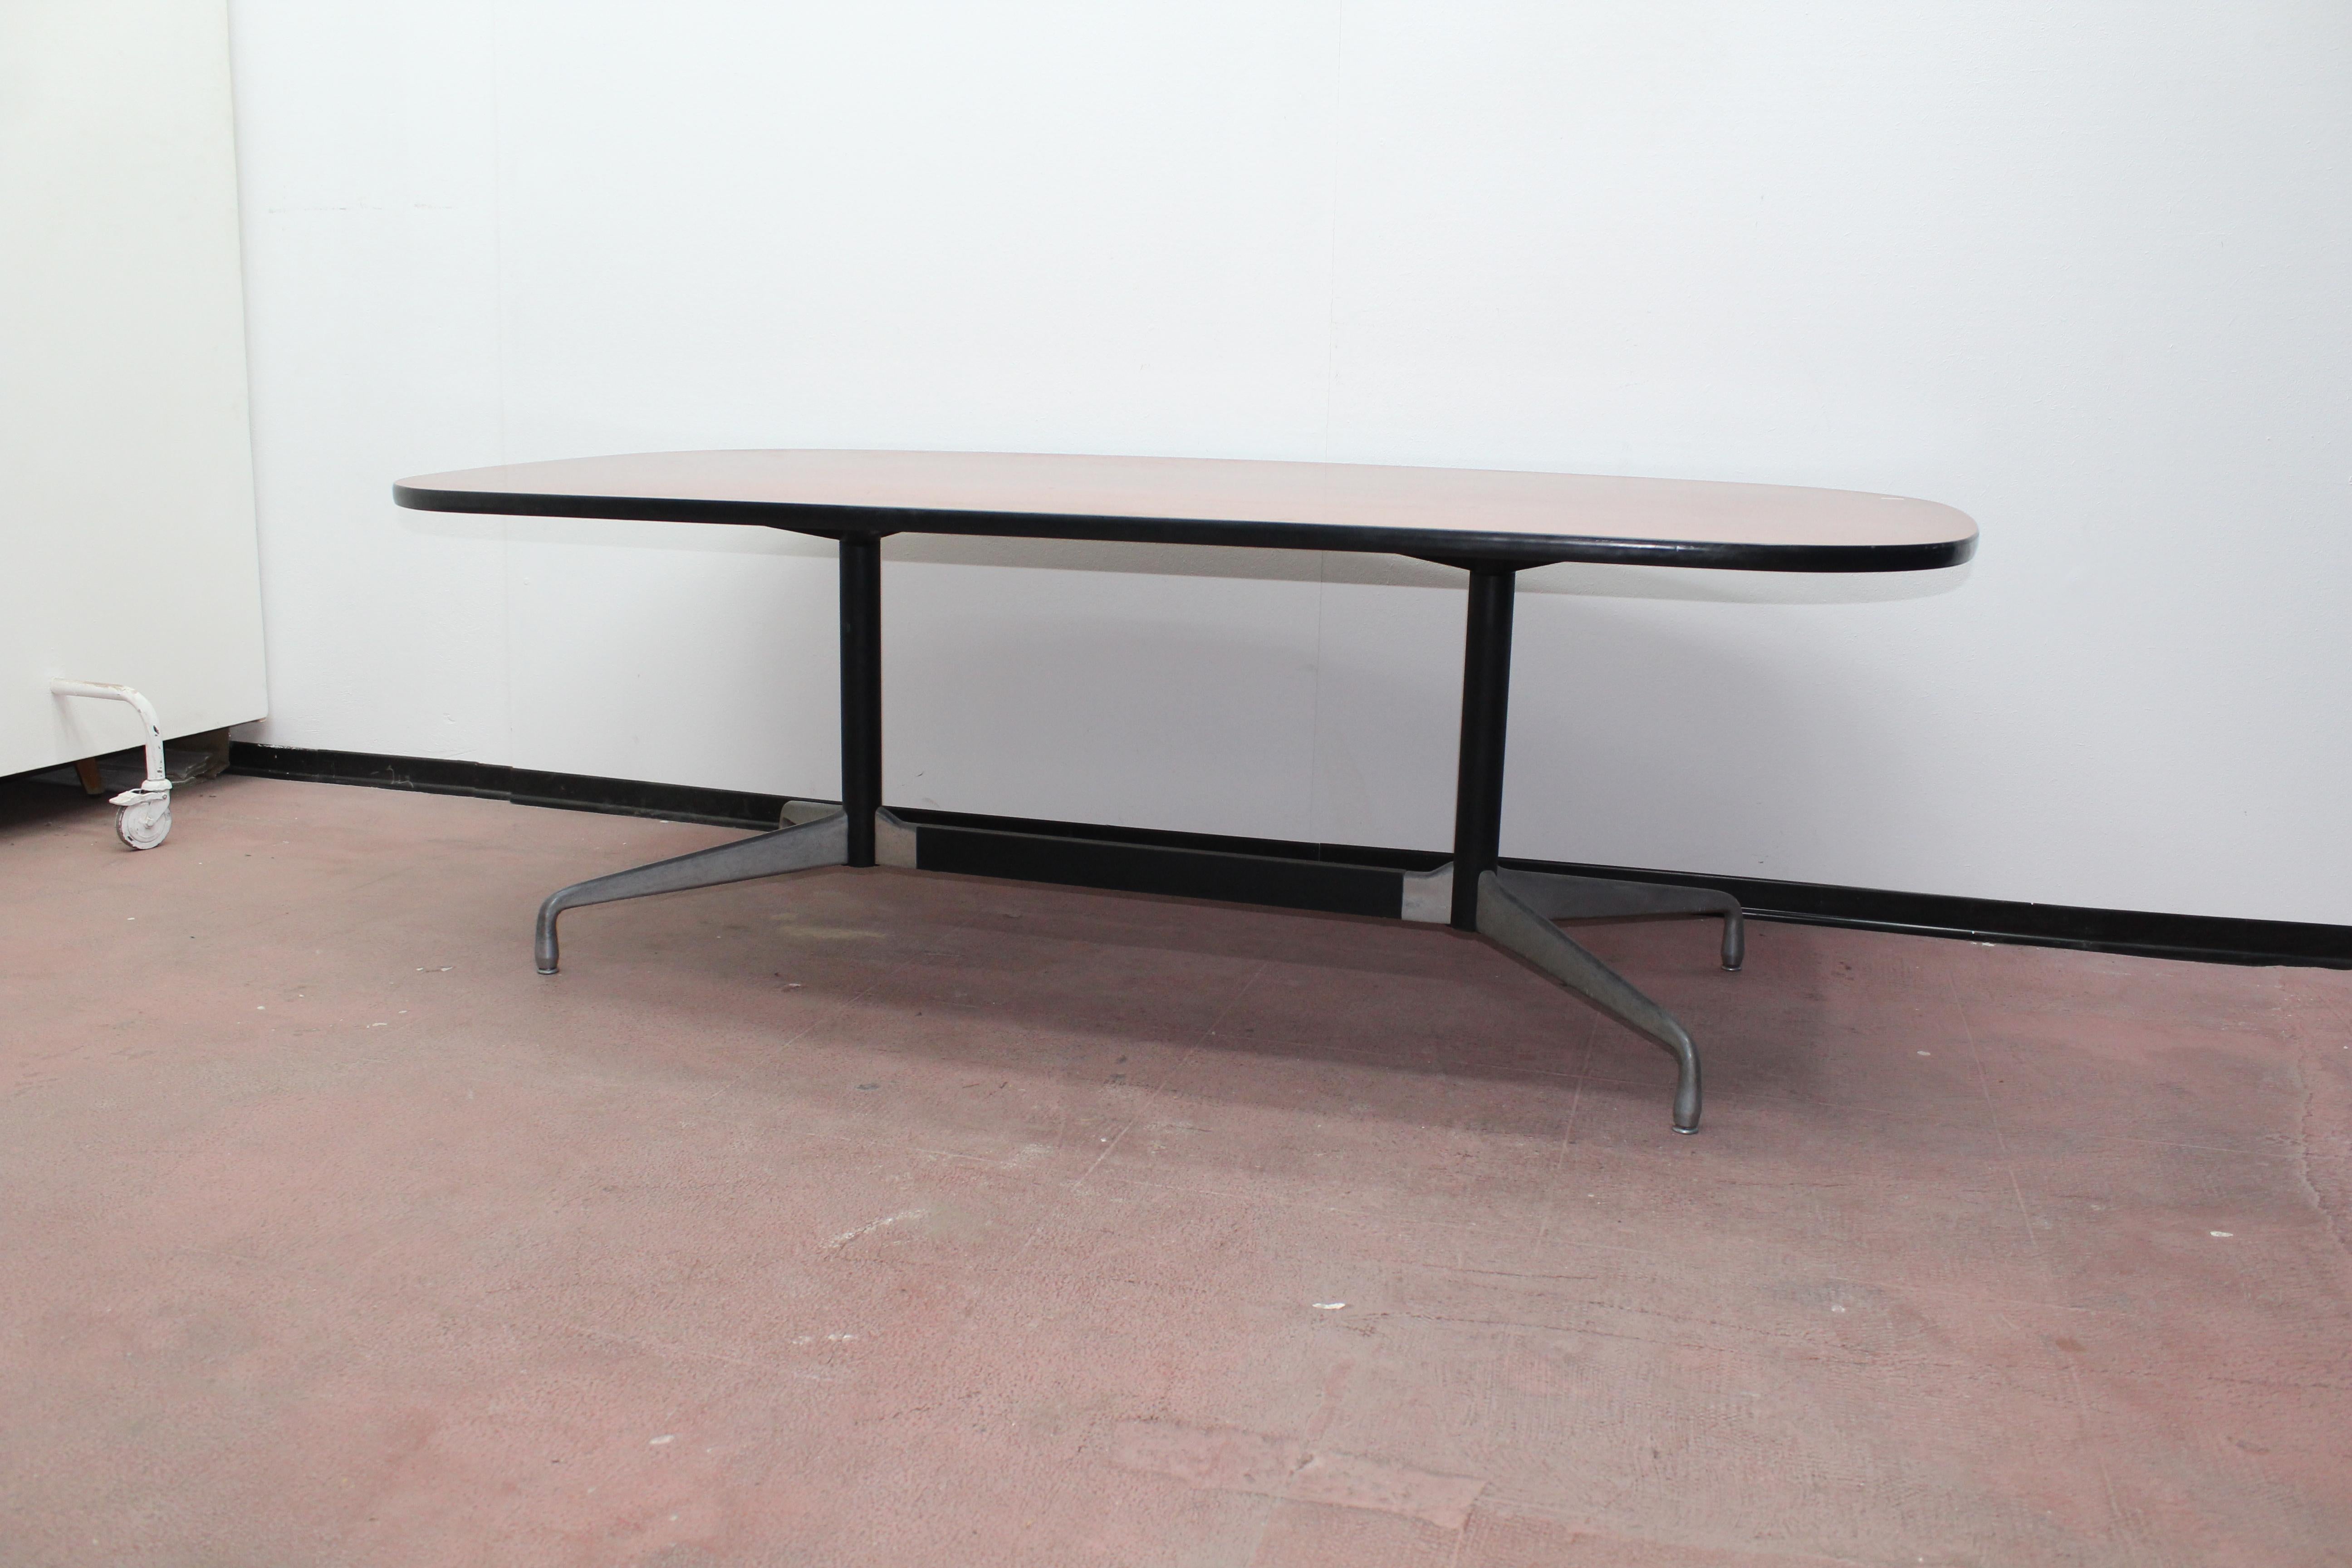 Late 20th Century 20th Century Modern Ashwood Conference Table Charles Eames 60s